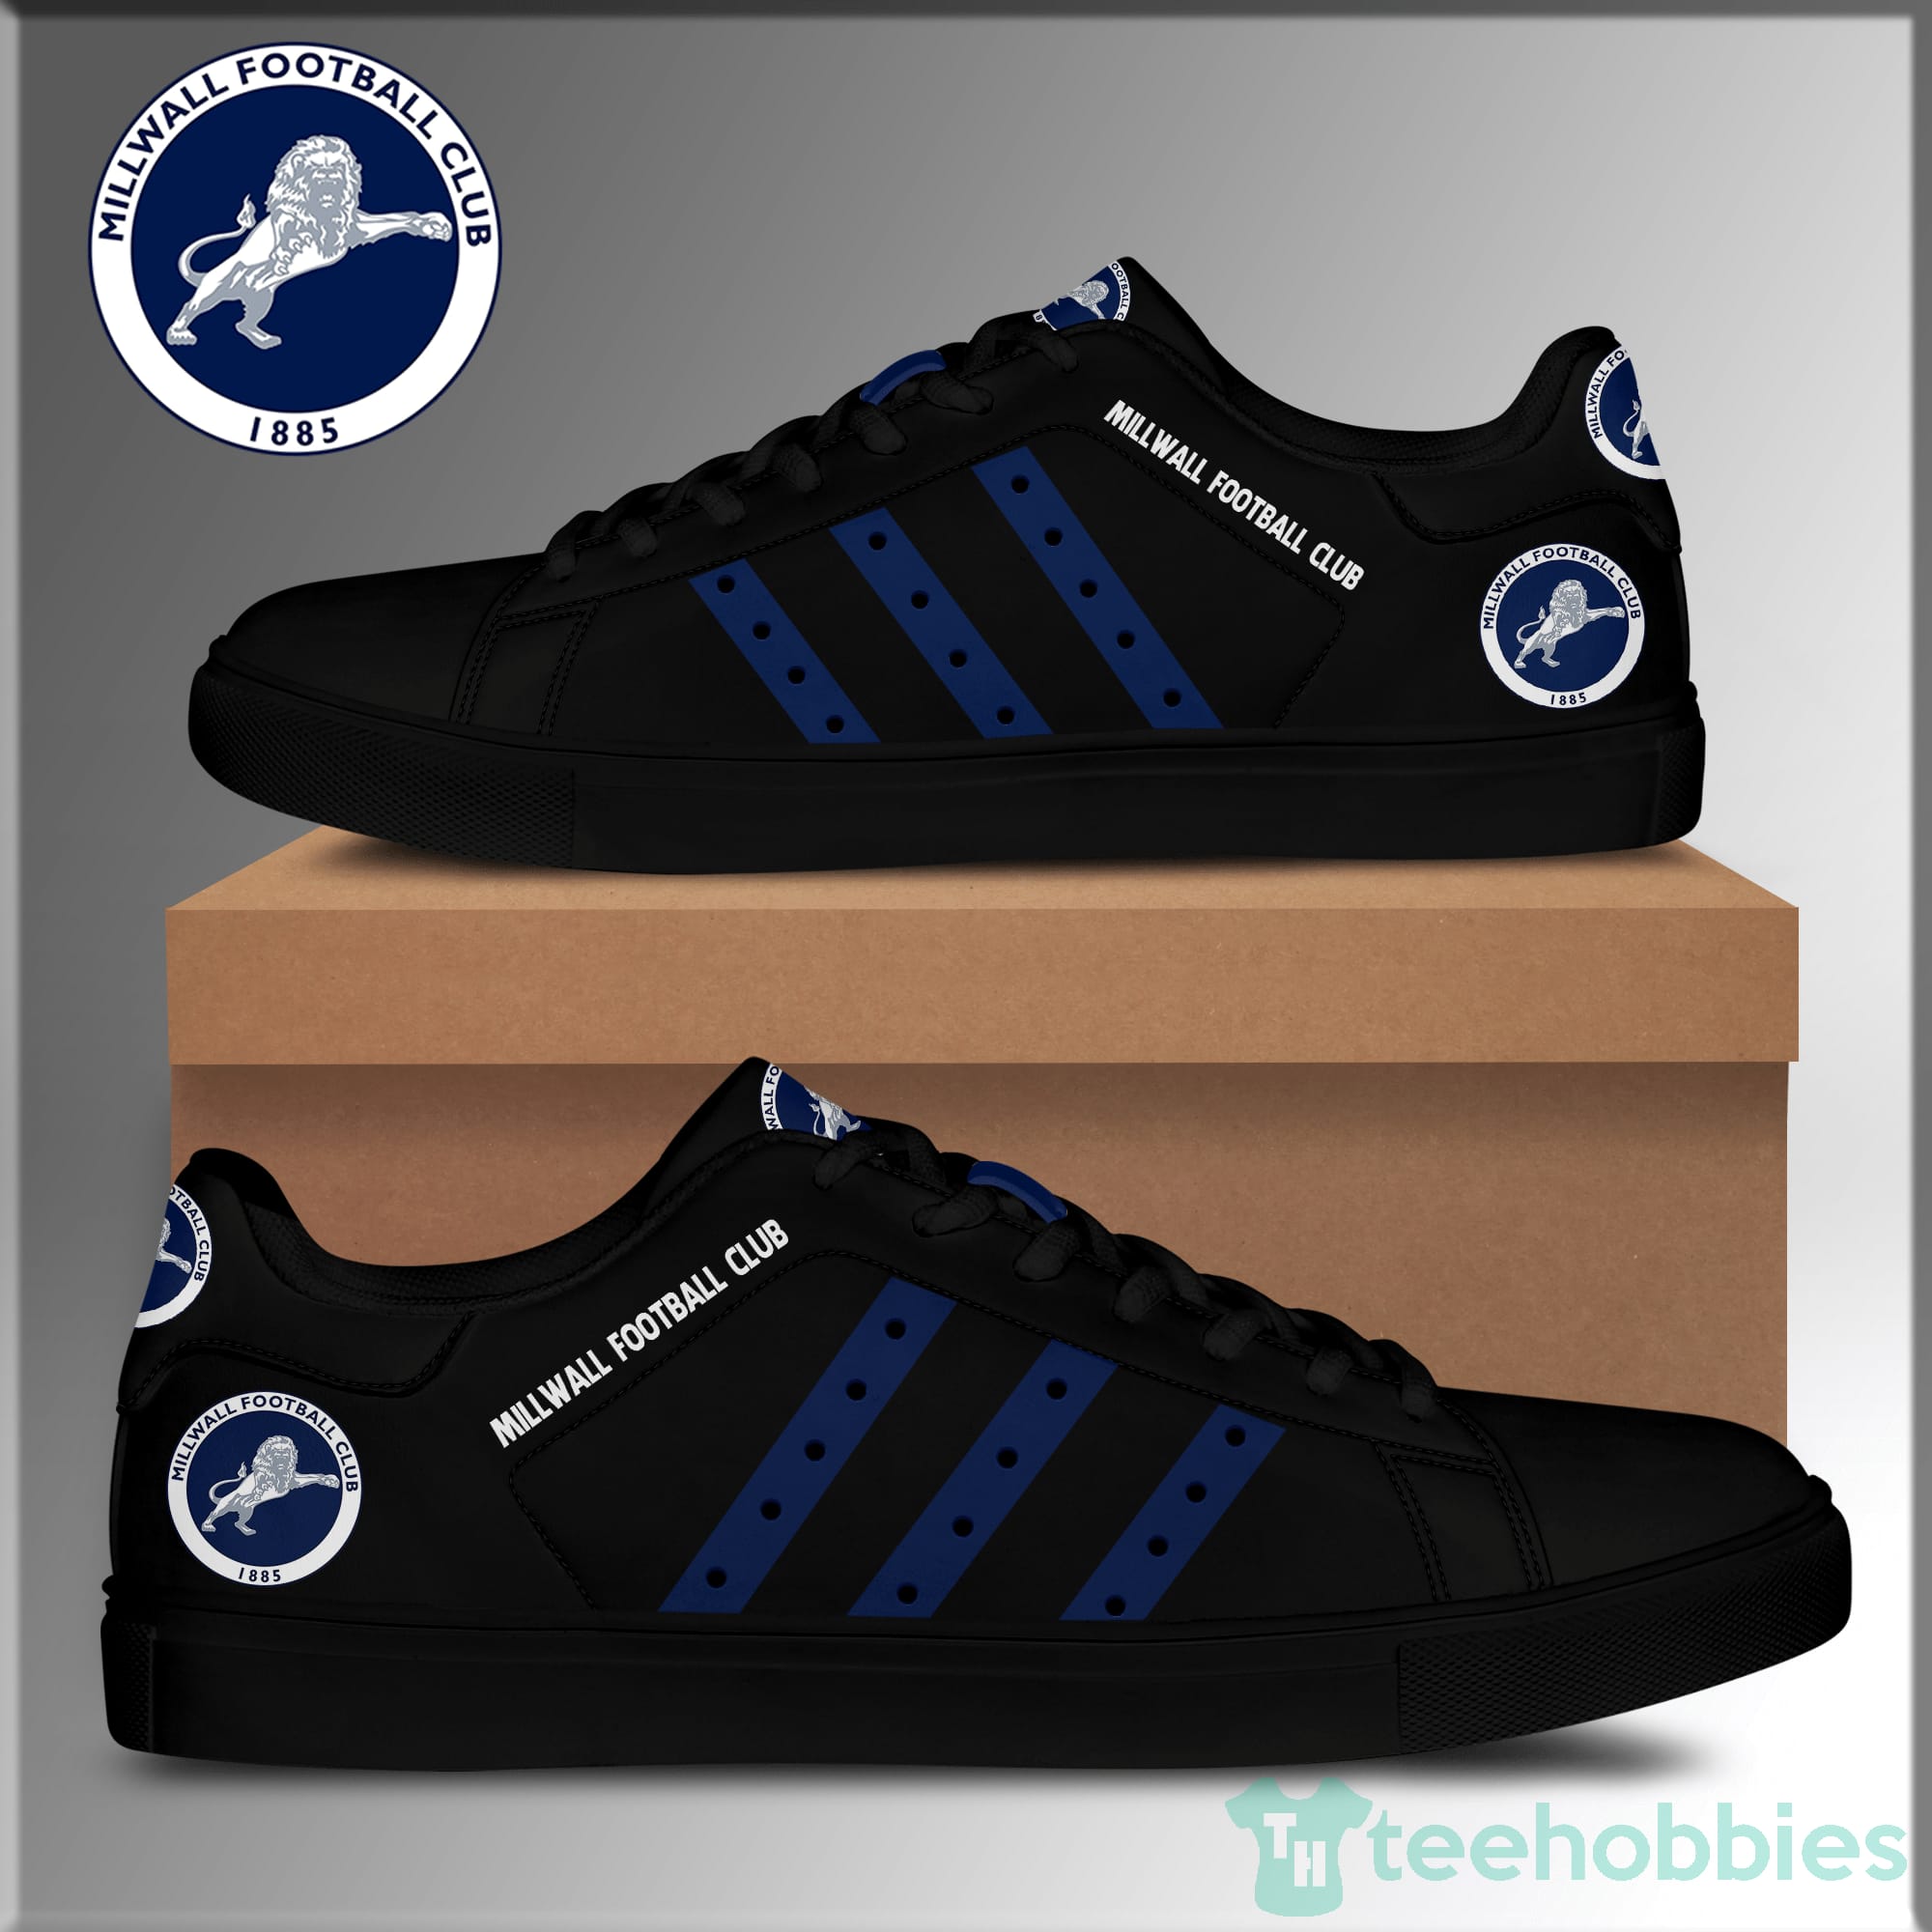 Millwall Football Club Low Top Skate Shoes Product photo 2